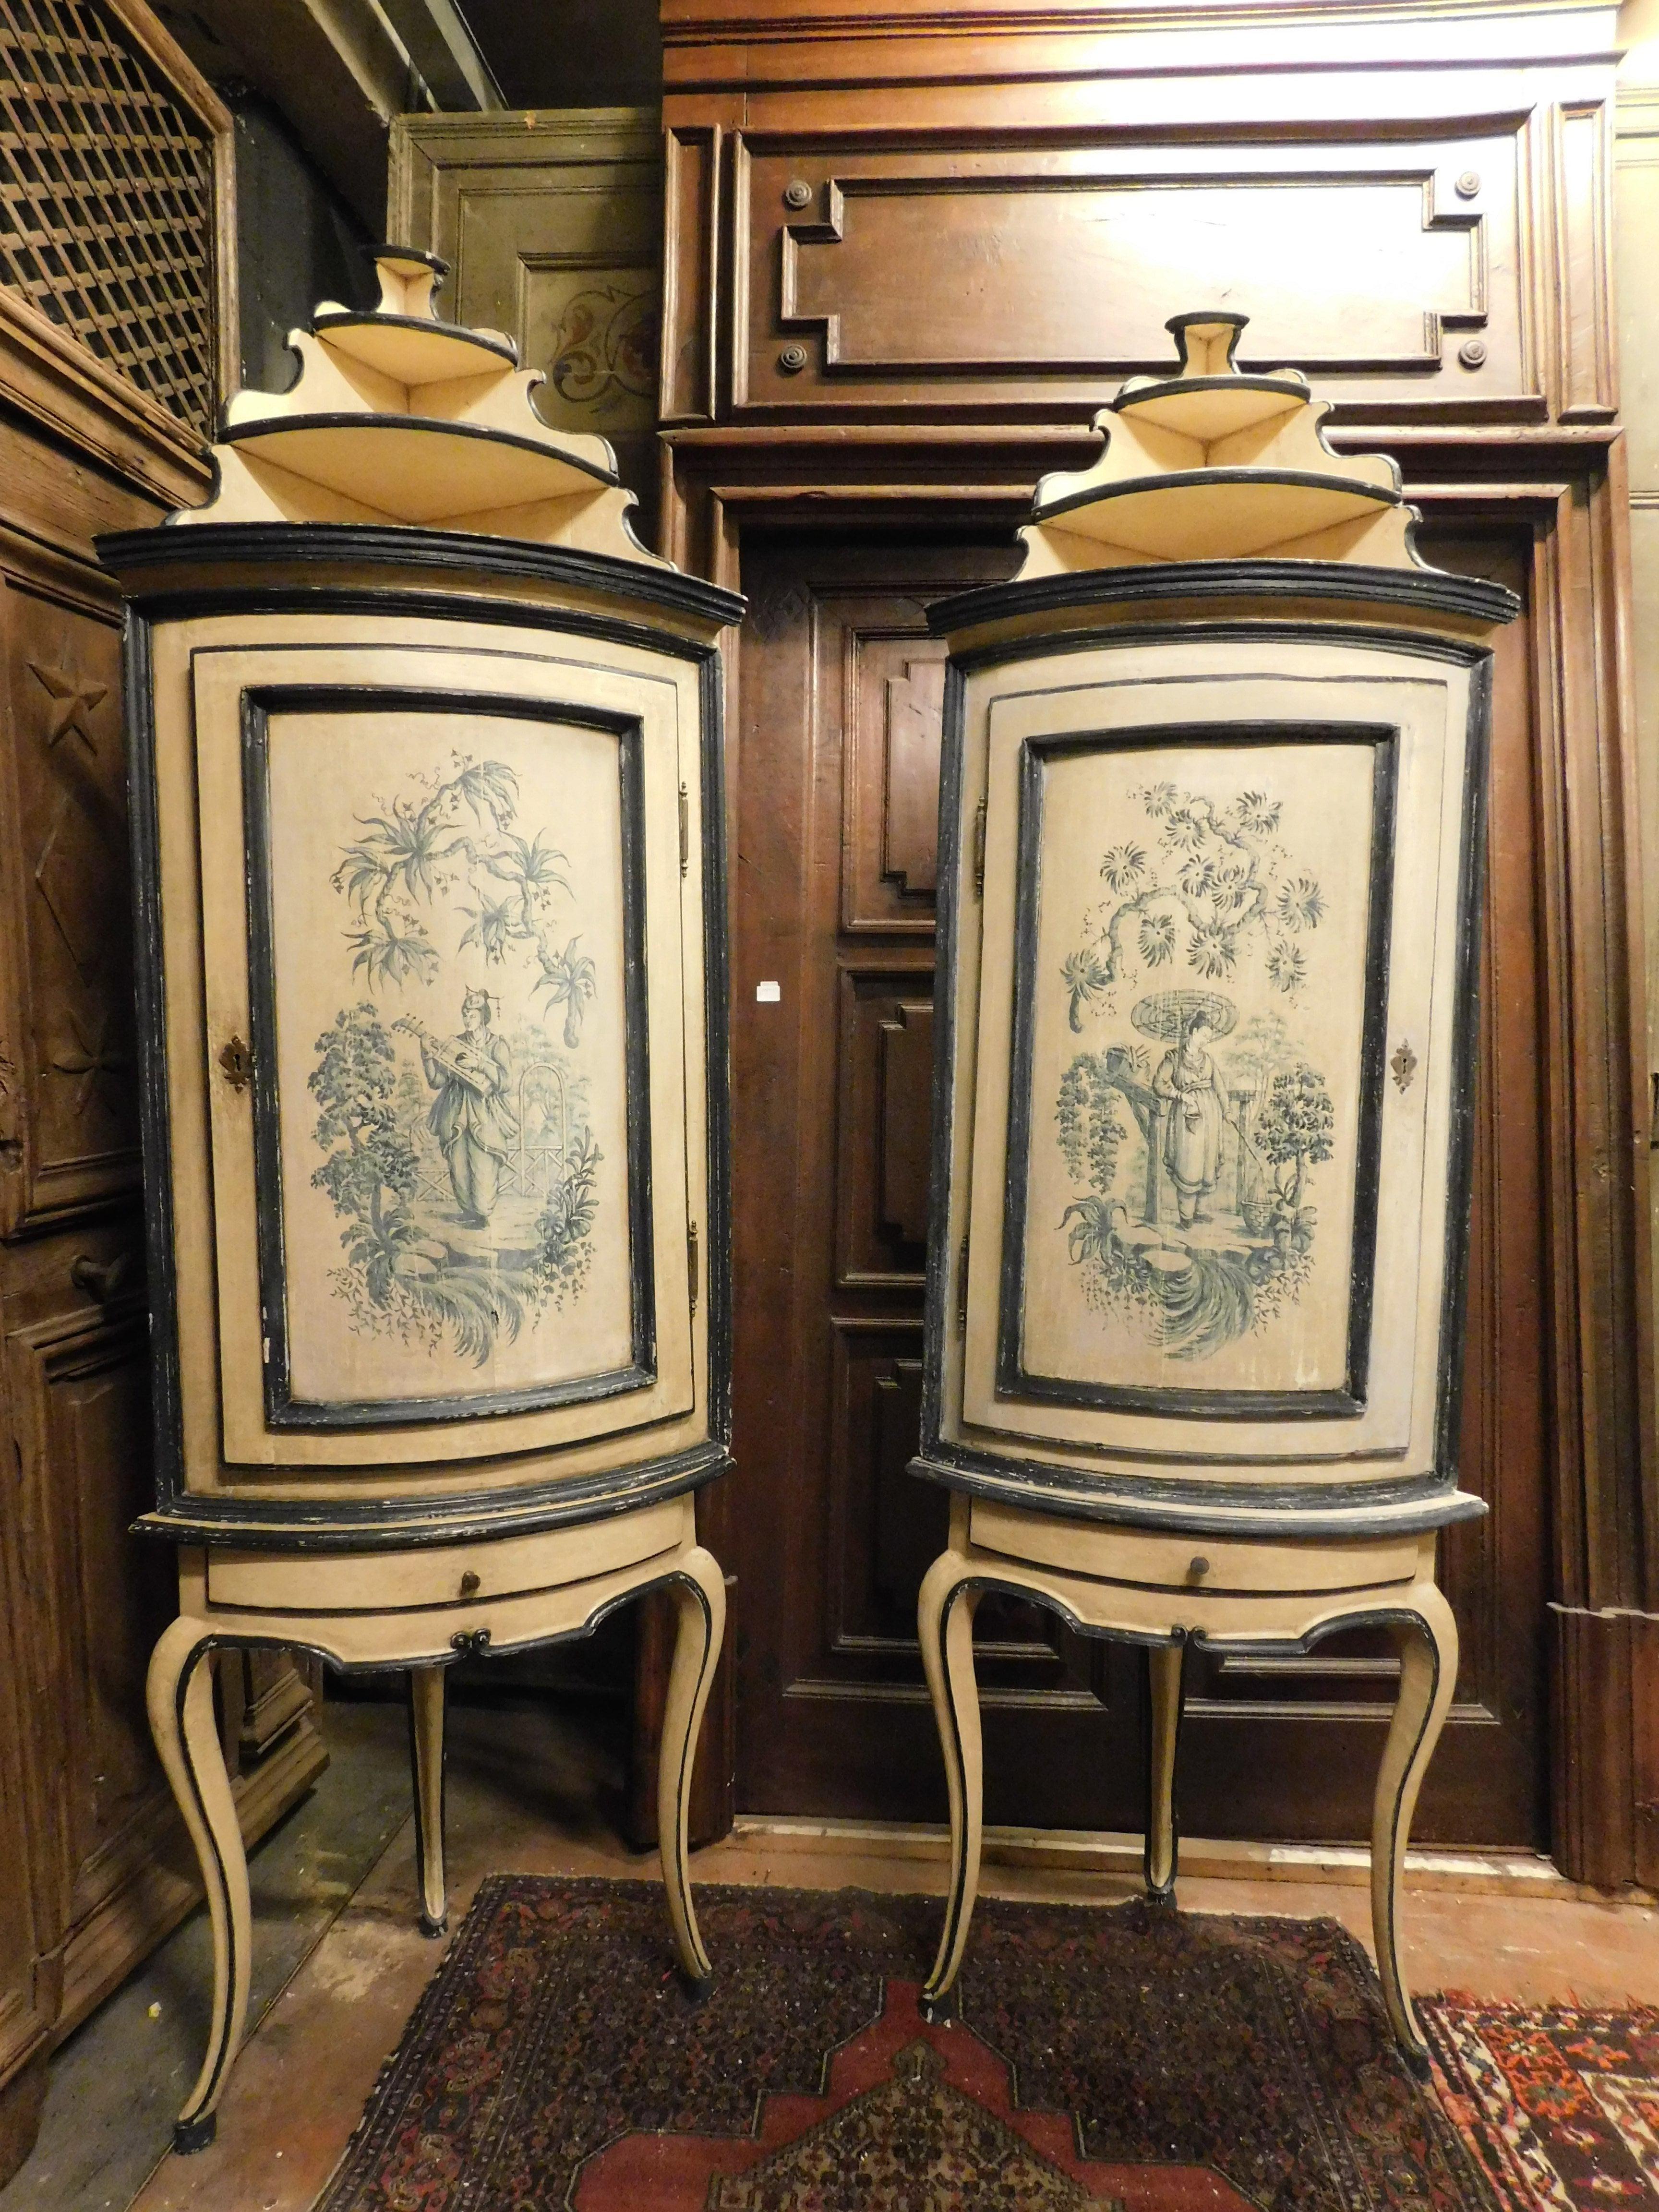 Ancient pair of corner cabinets in lacquered wood with chinoiserie, drawer and front door painted with female figures and plant elements, from the 18th Century, from Italy, each measuring cm W 80 x d 54 x H 240.
Neutral colors such as straw yellow